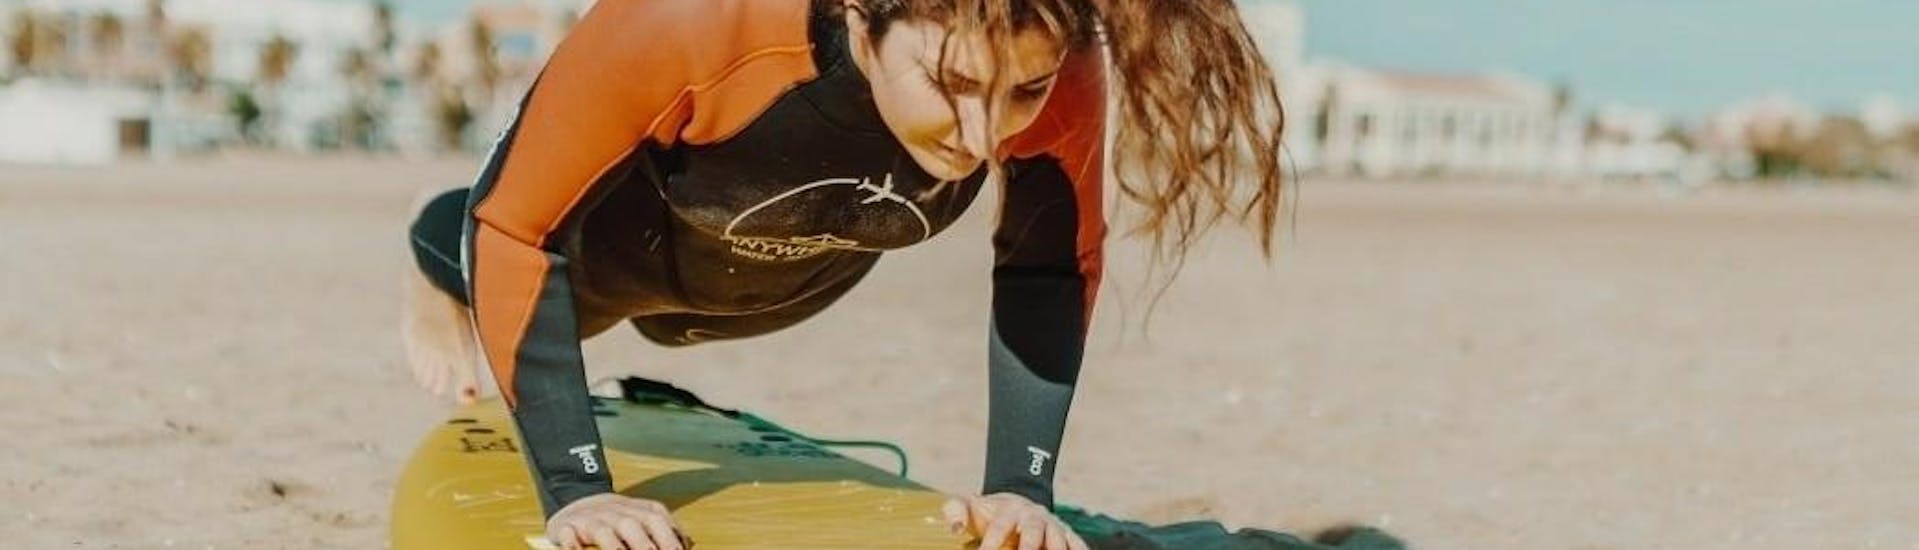 Private surfing lessons in Valencia with Anywhere Watersports. 